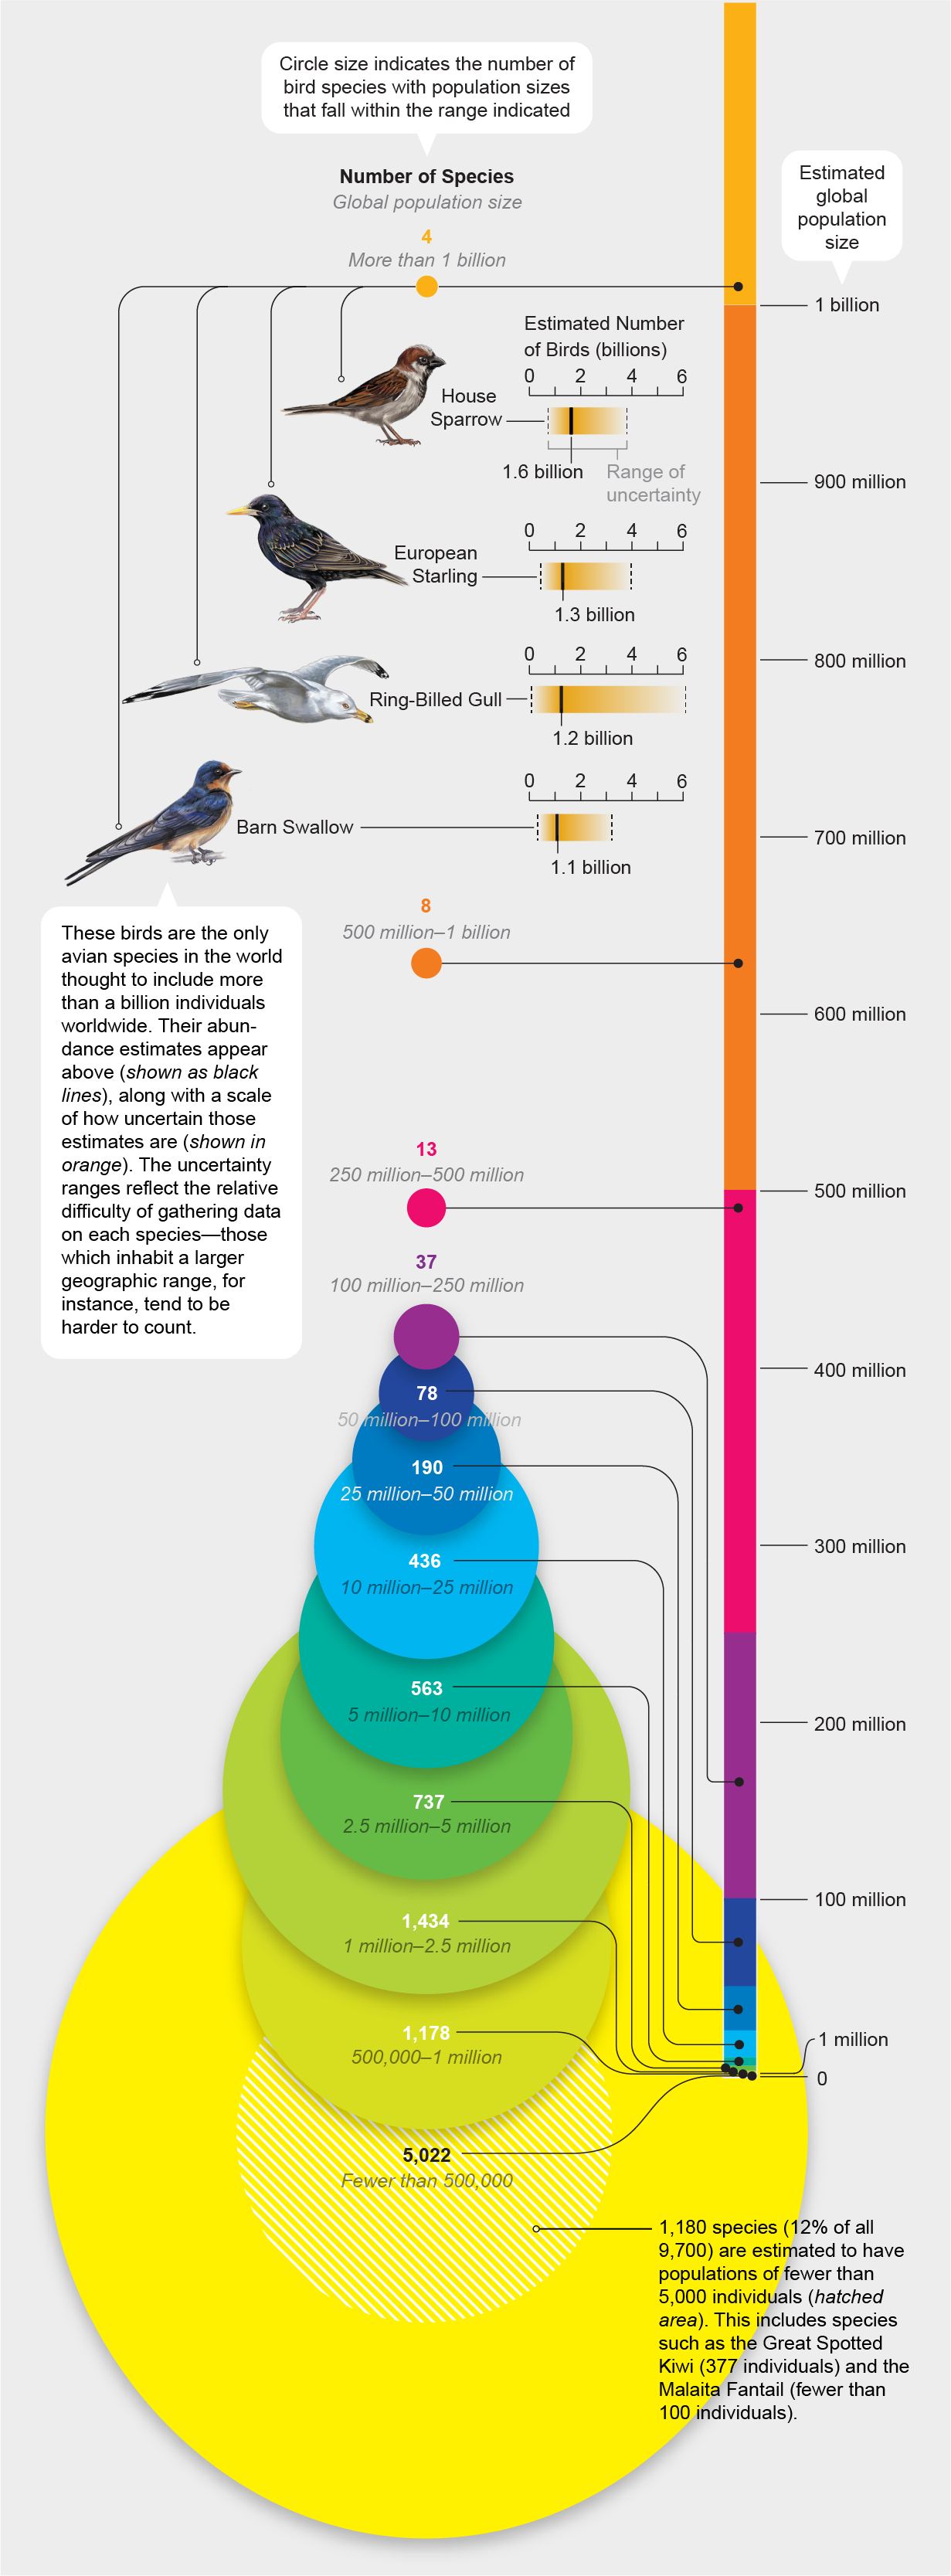 Graphic groups bird species by population size and shows circles scaled according to the number of species in each group.